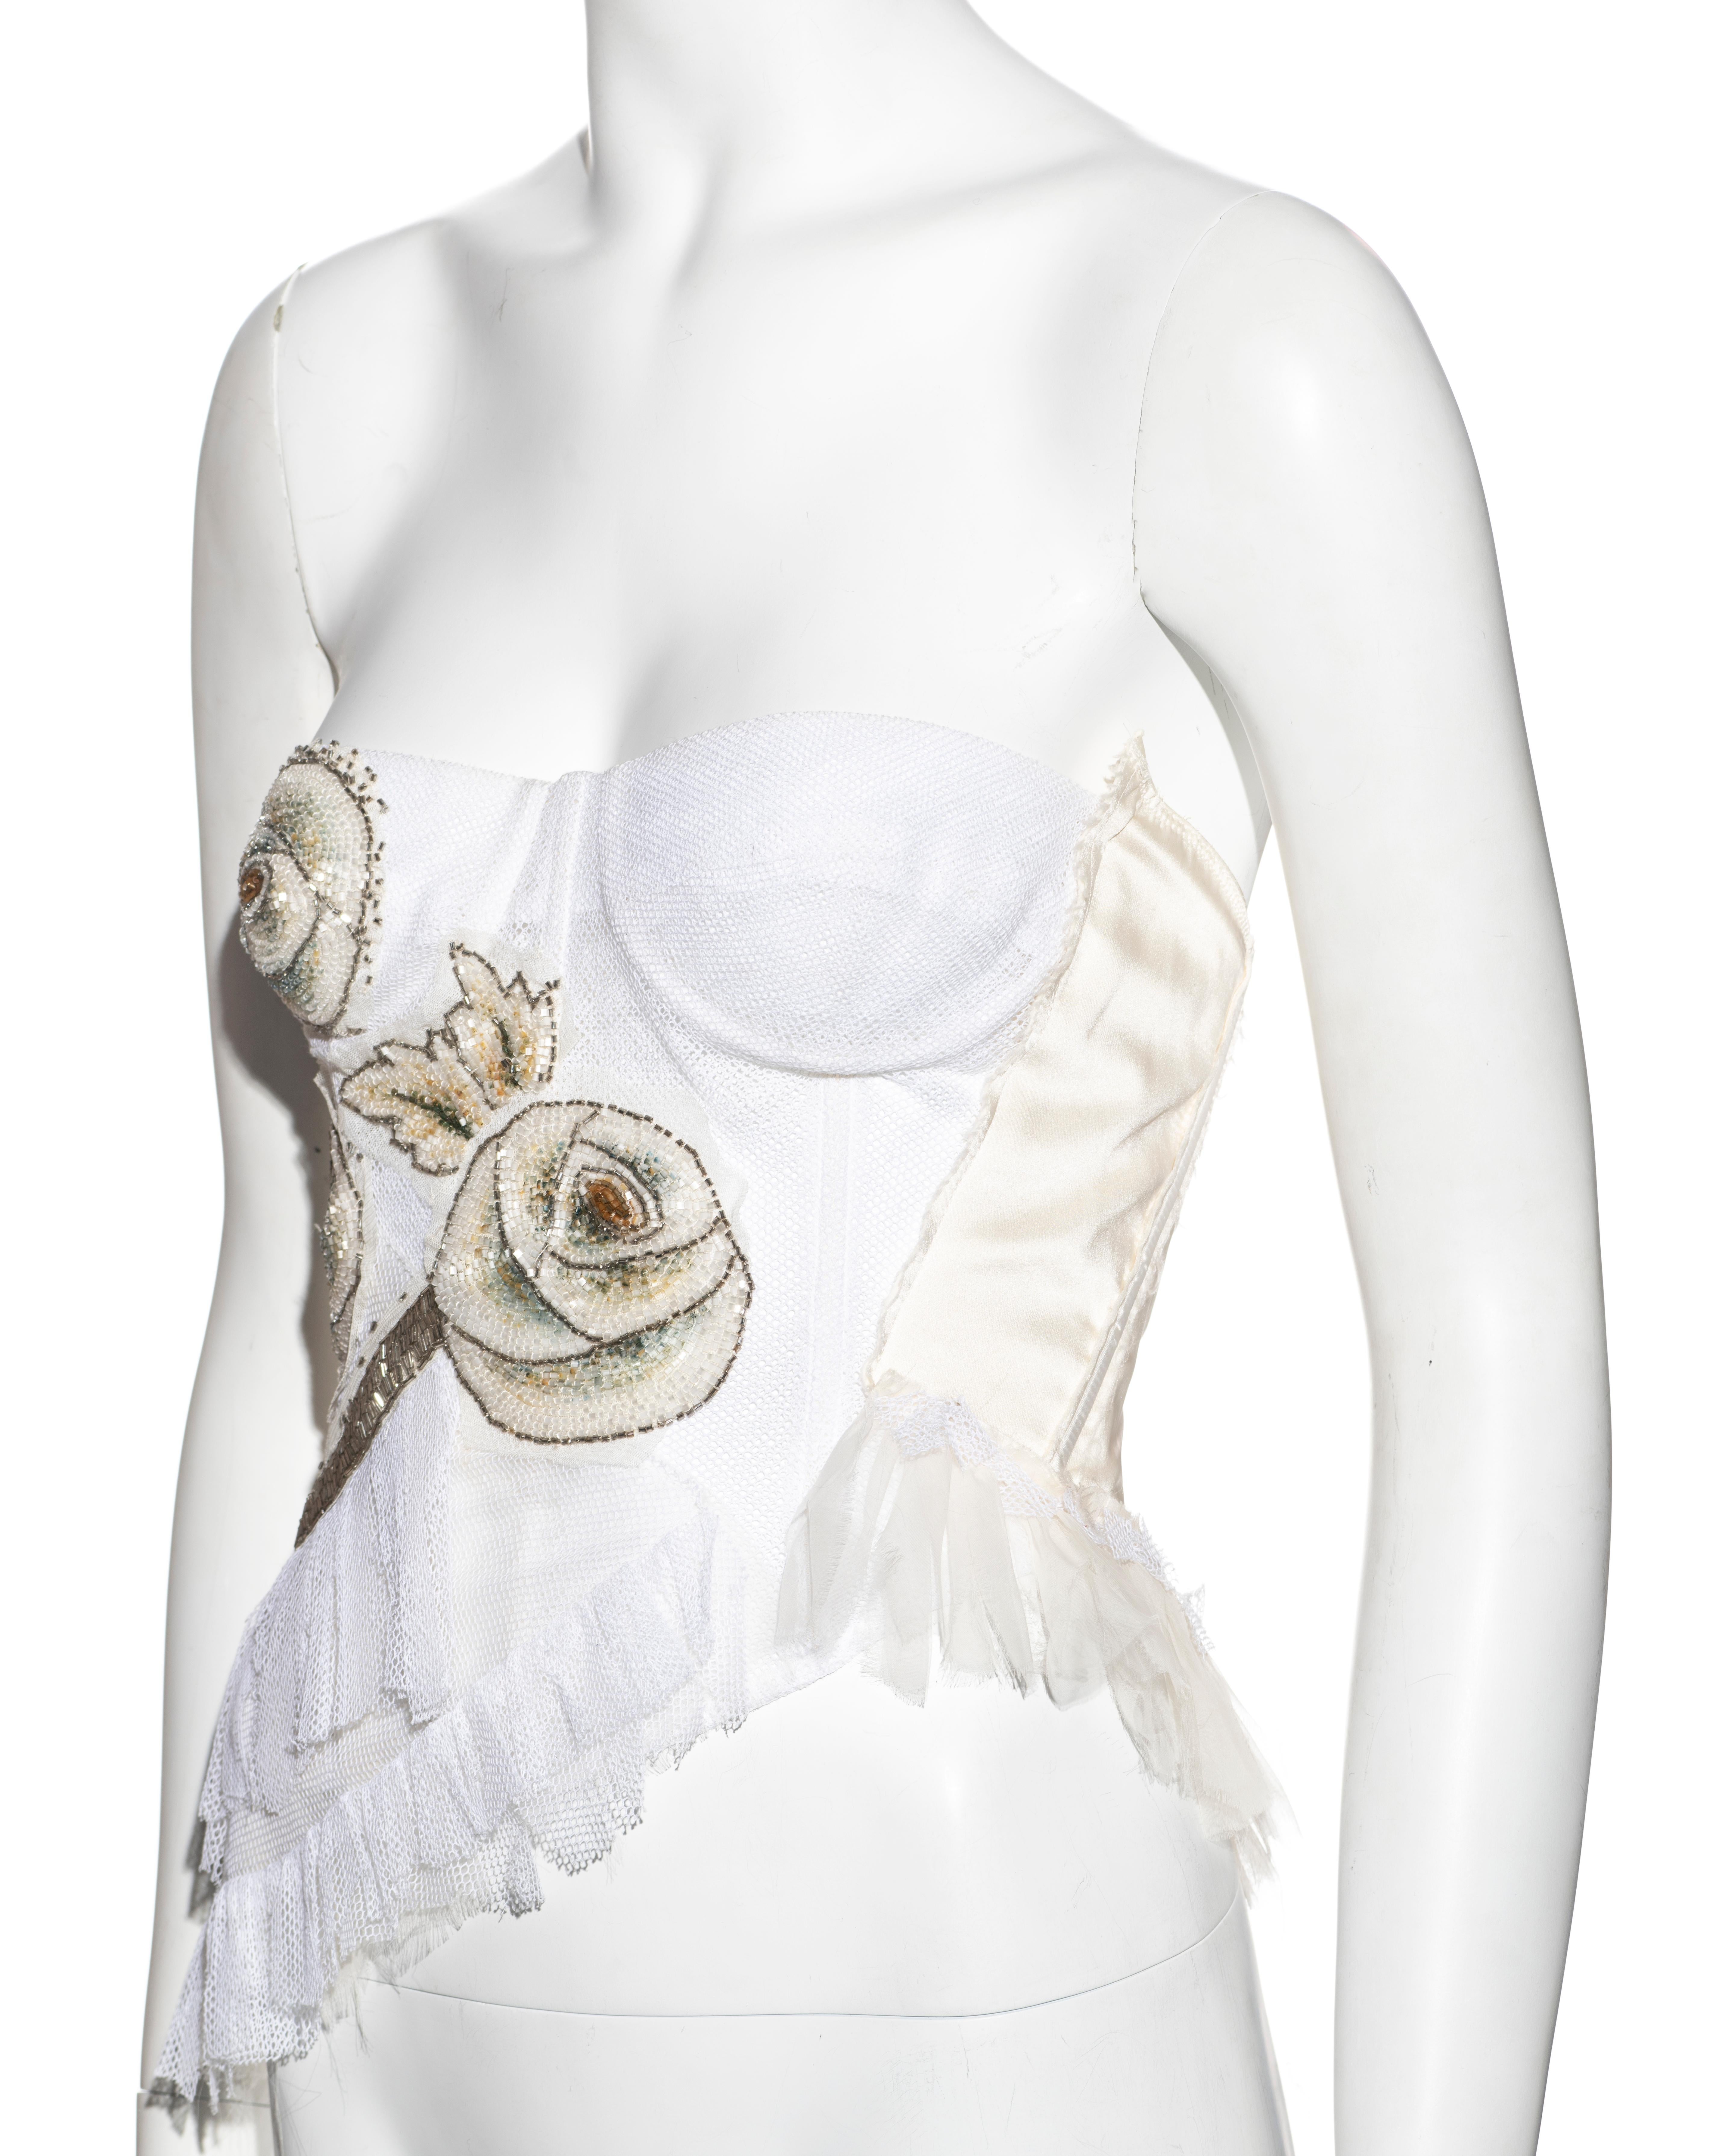 Women's Christian Dior by John Galliano silk and tulle embellished corset, ss 2001